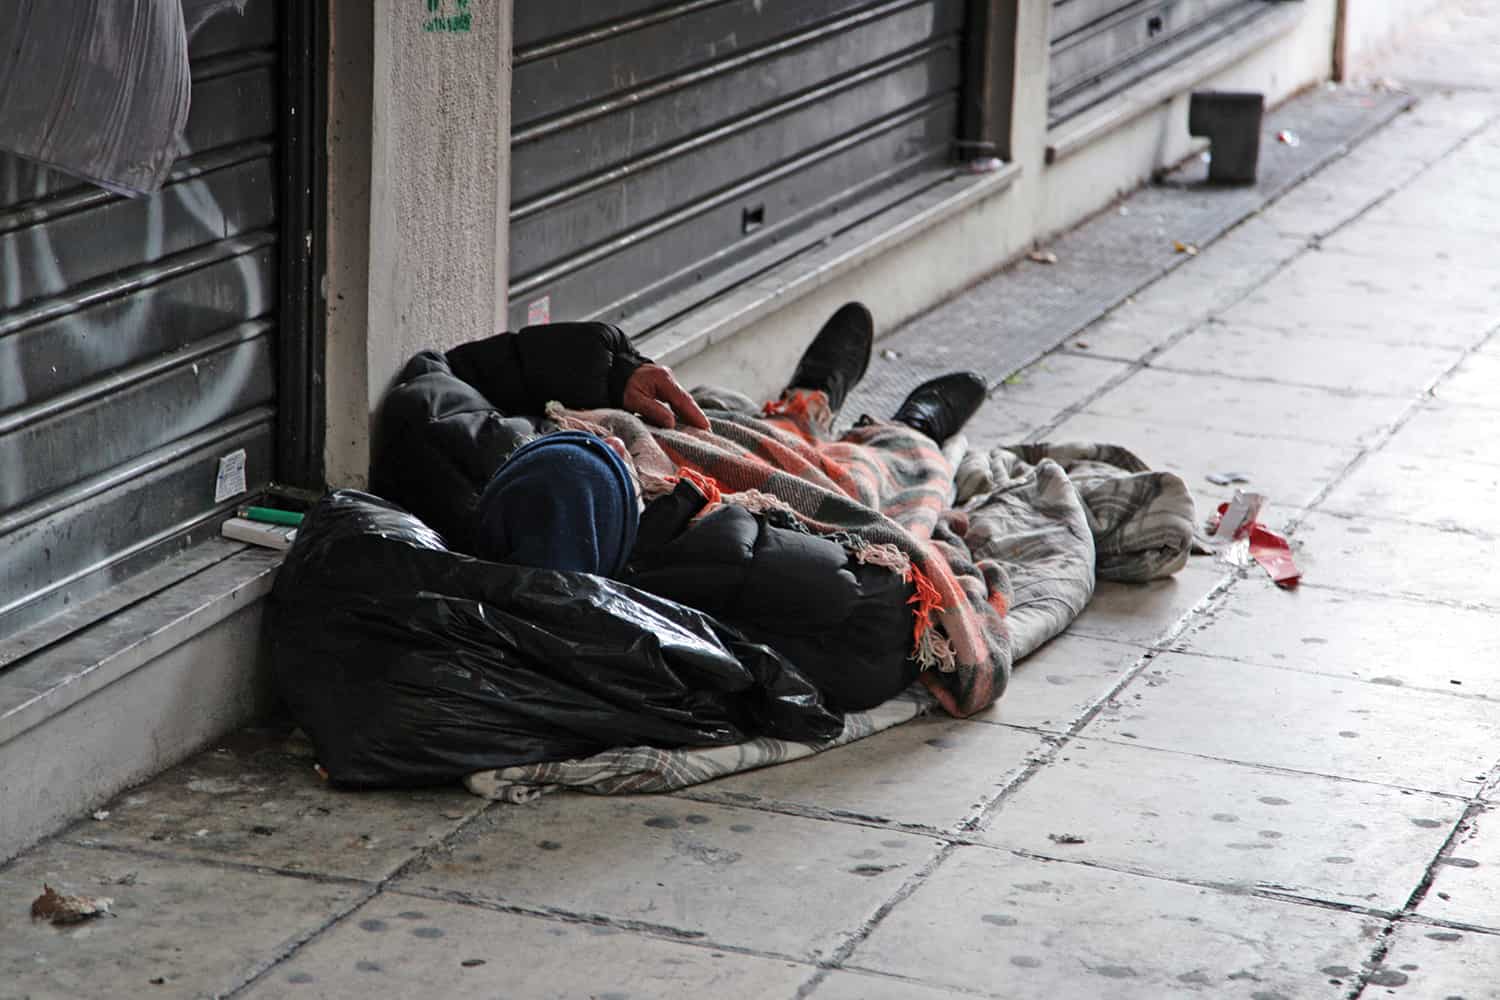 A homeless person lying on the street